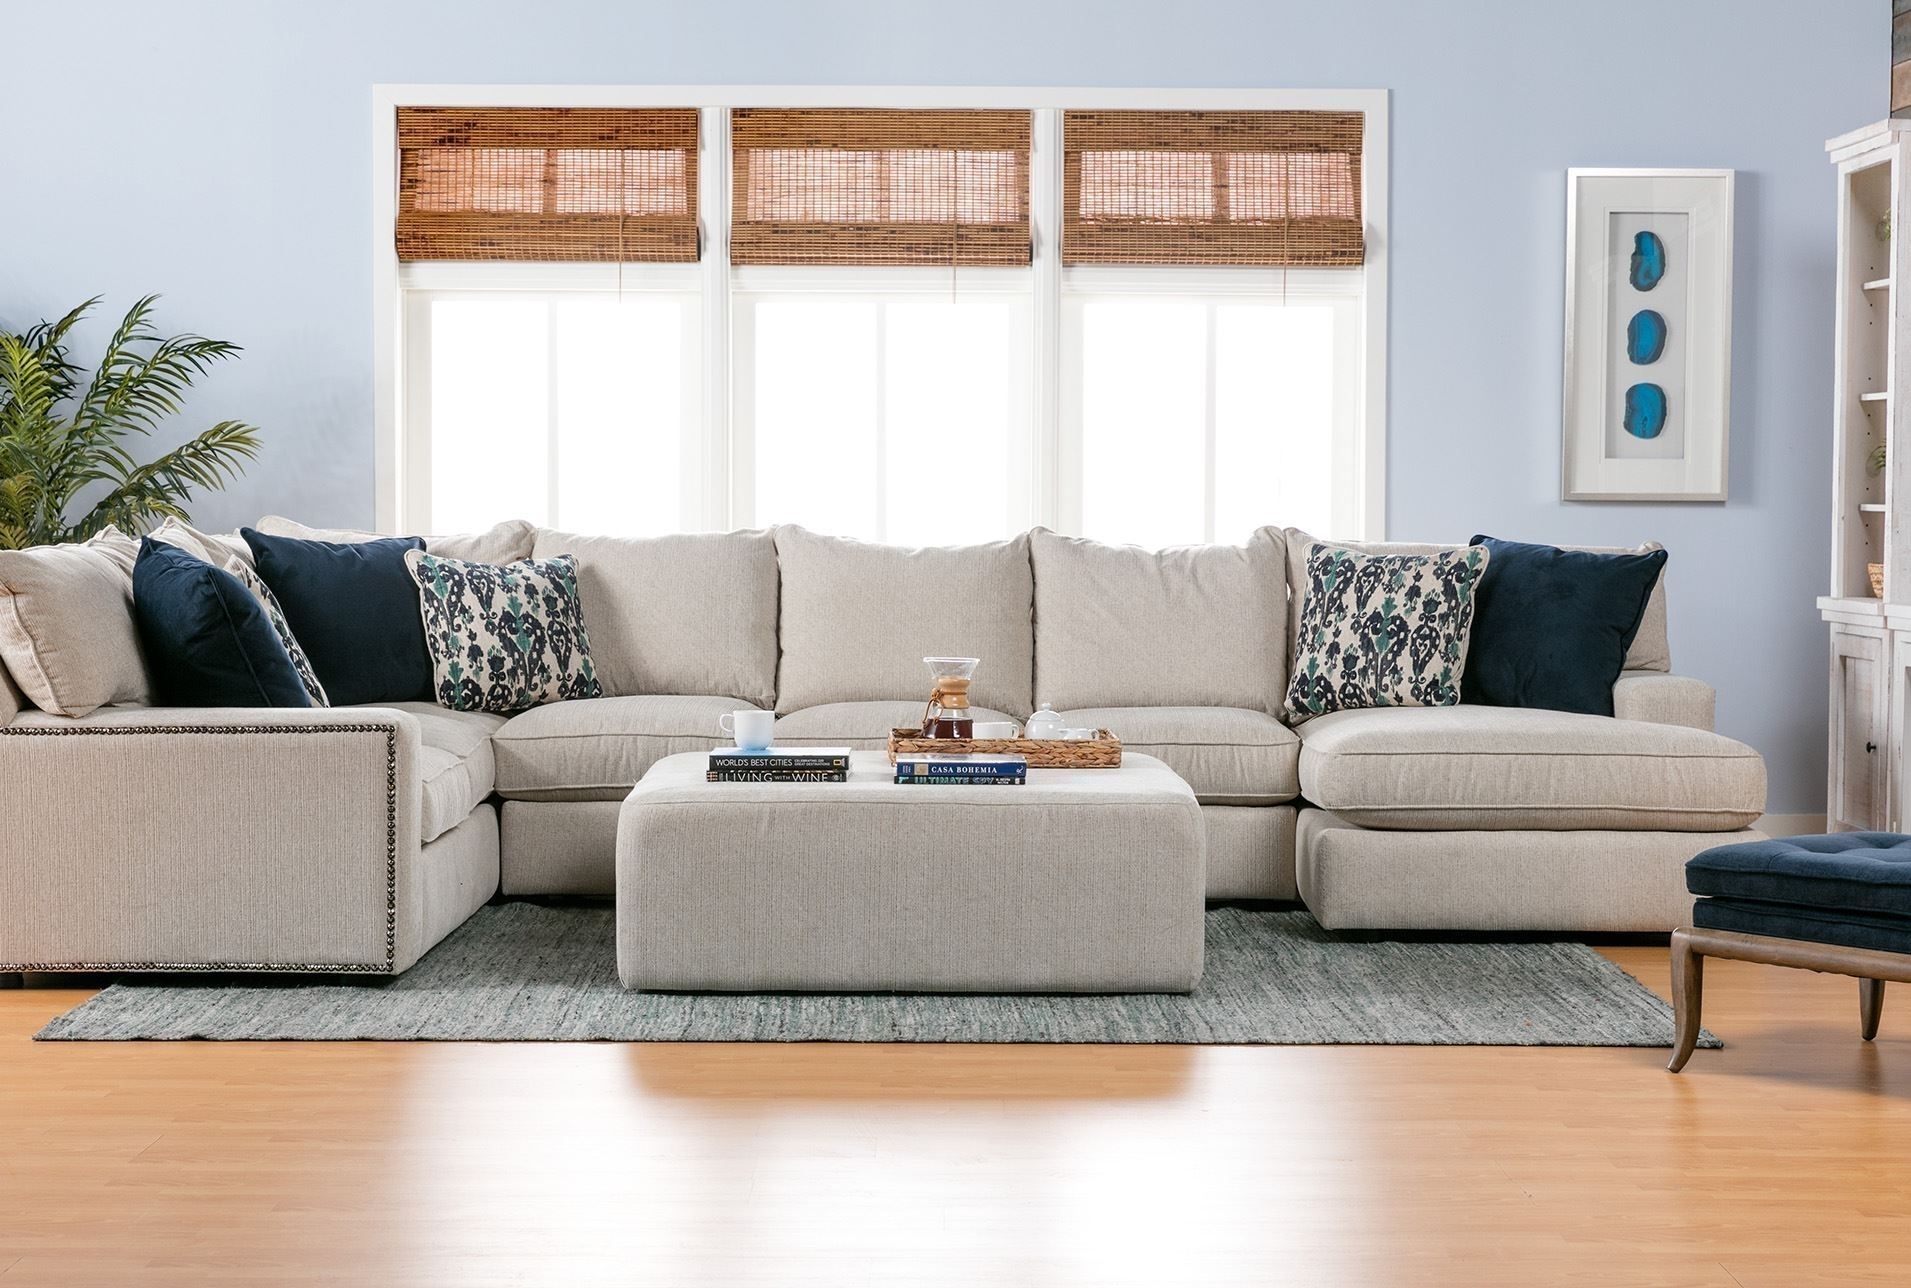 3 Piece Sectional Sofa With Chaise | Home Furniture Ideas Intended For Meyer 3 Piece Sectionals With Raf Chaise (View 29 of 30)